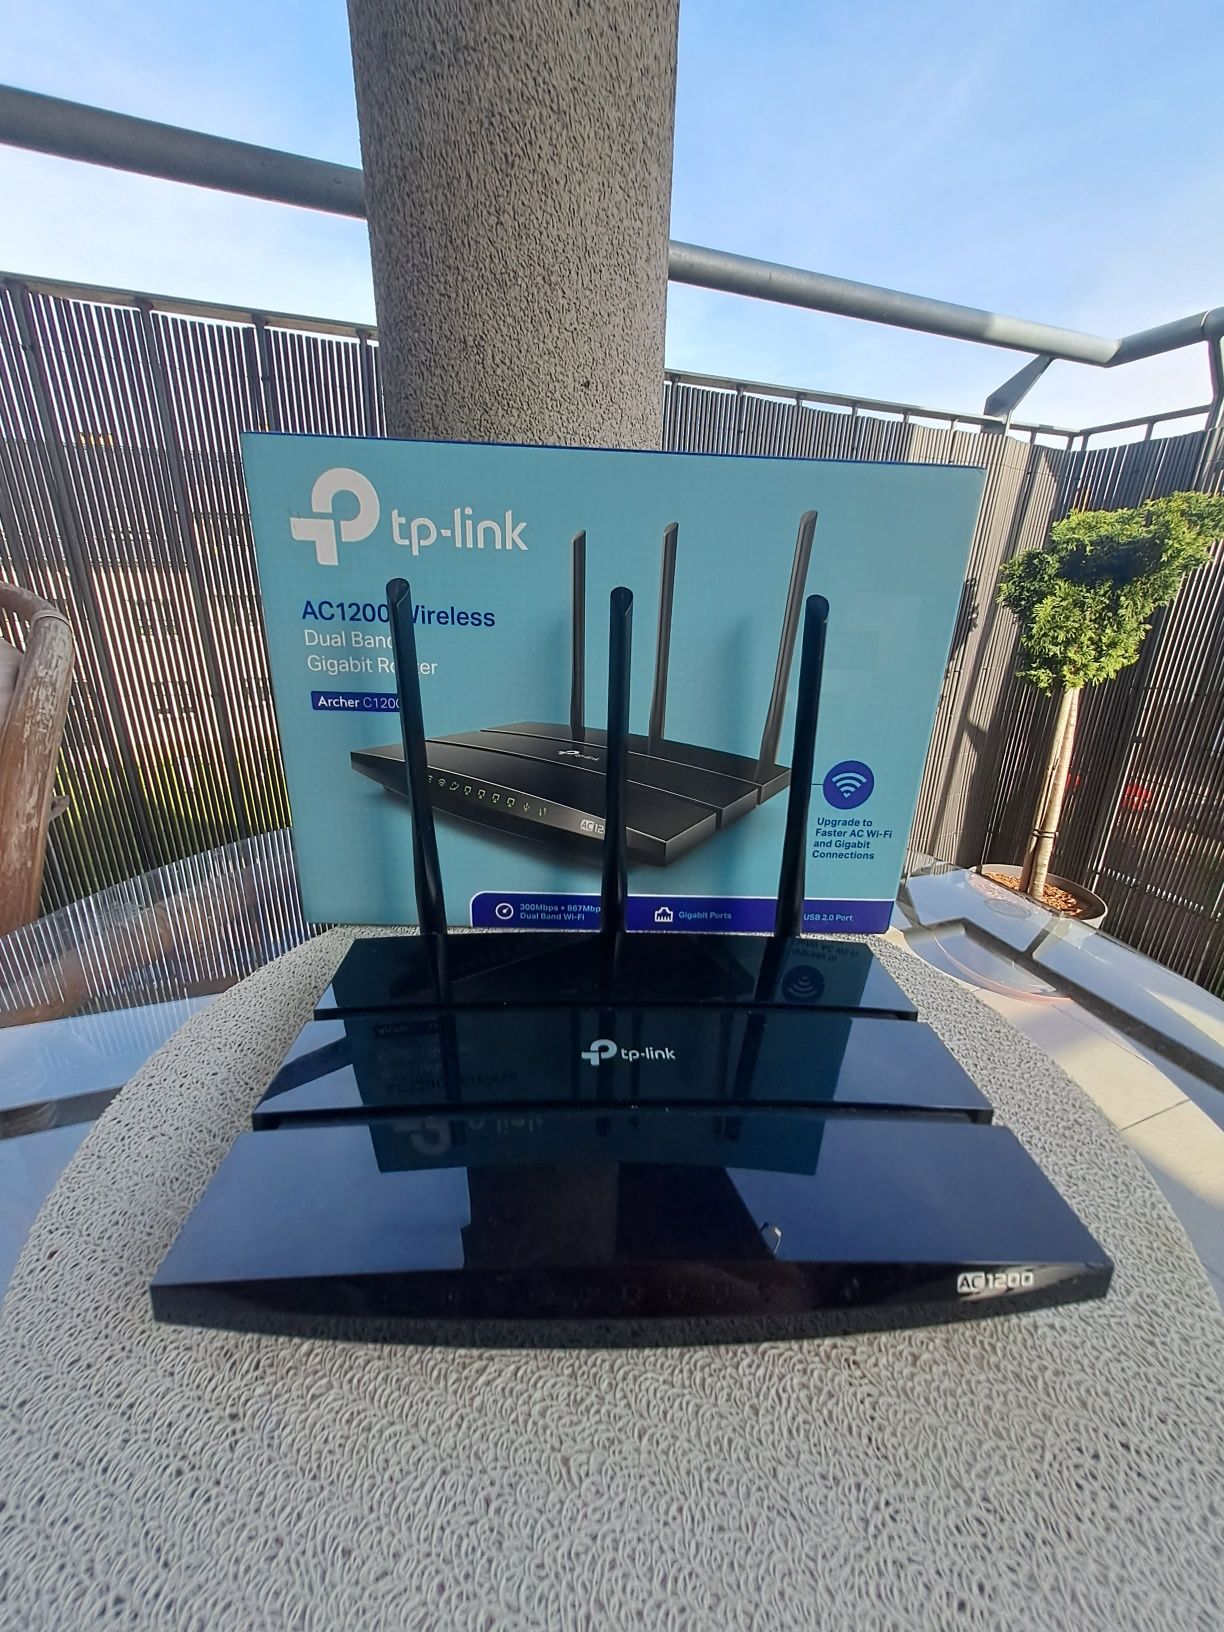 Tp-Link AC1200 Wireless router